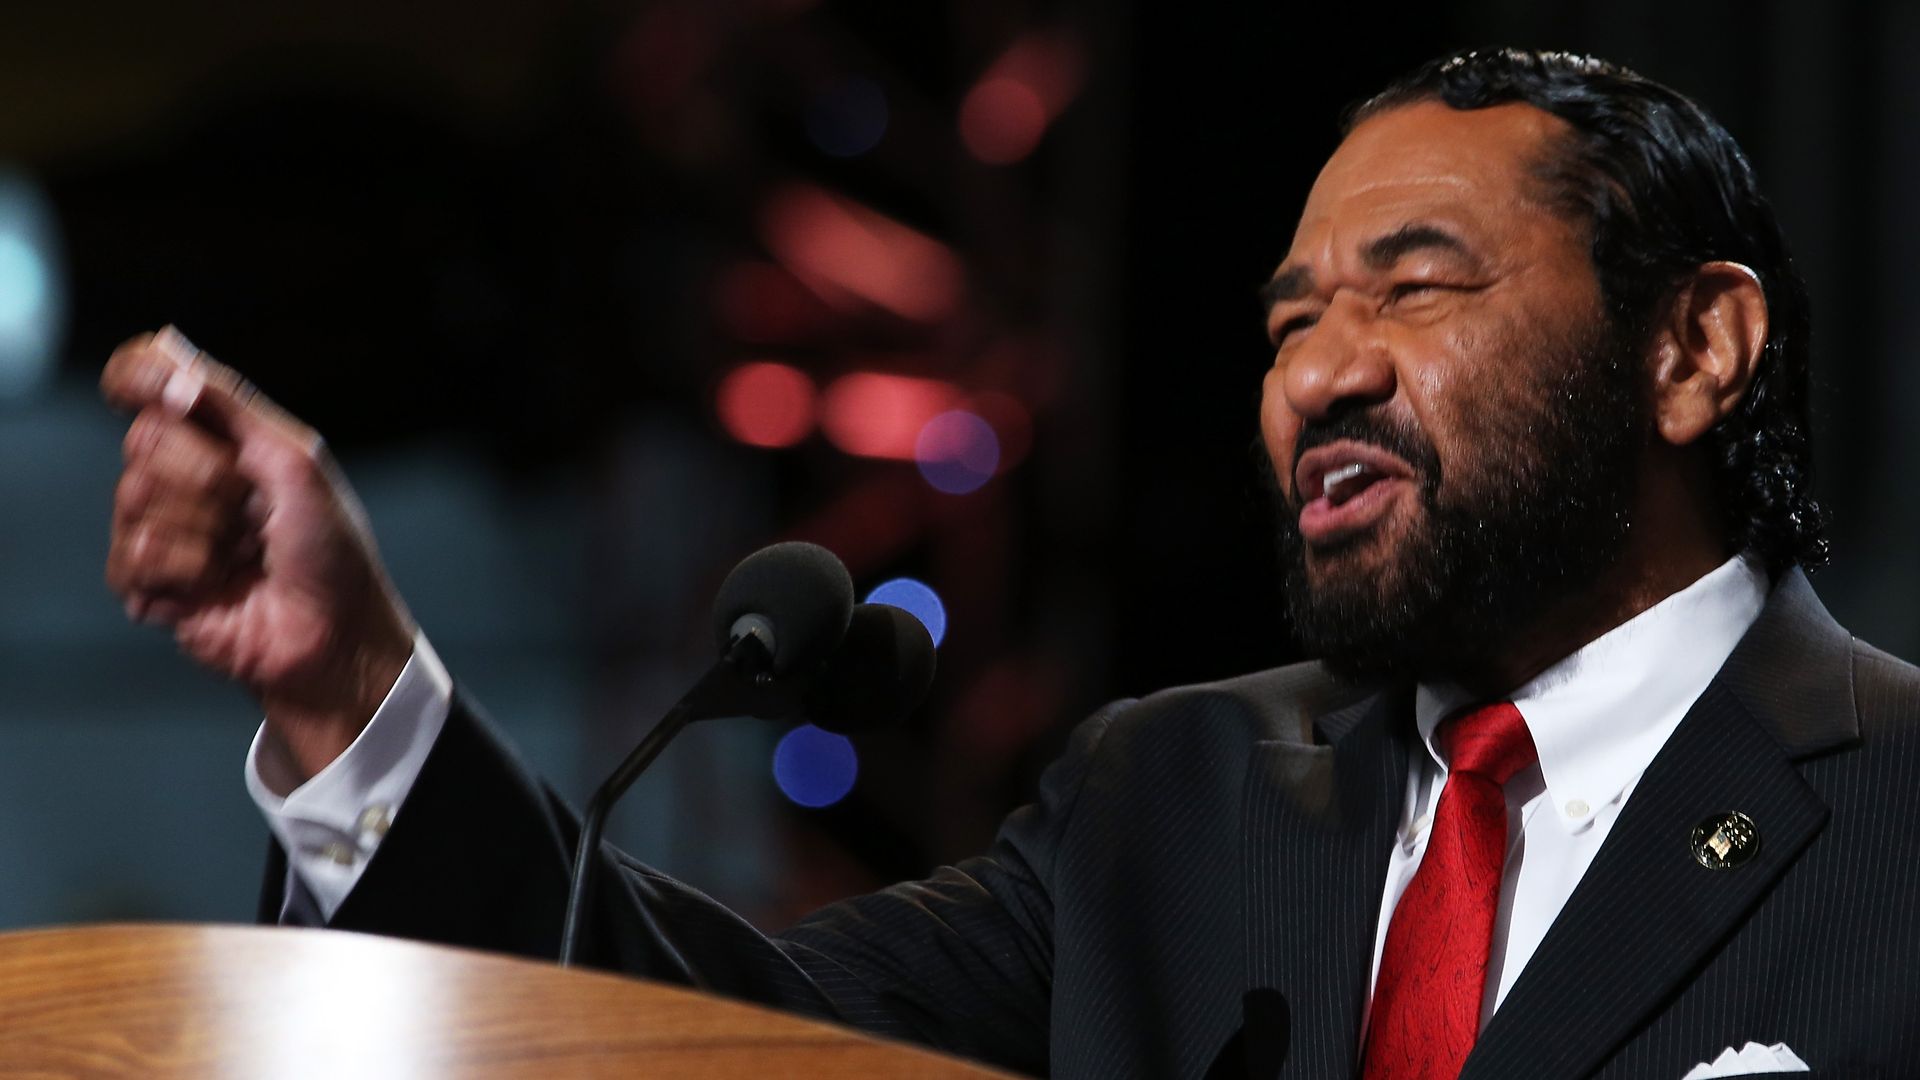 Rep. Al Green (D-TX) speaks during day two of the Democratic National Convention at Time Warner Cable Arena on September 5, 2012 in Charlotte, North Carolina. 